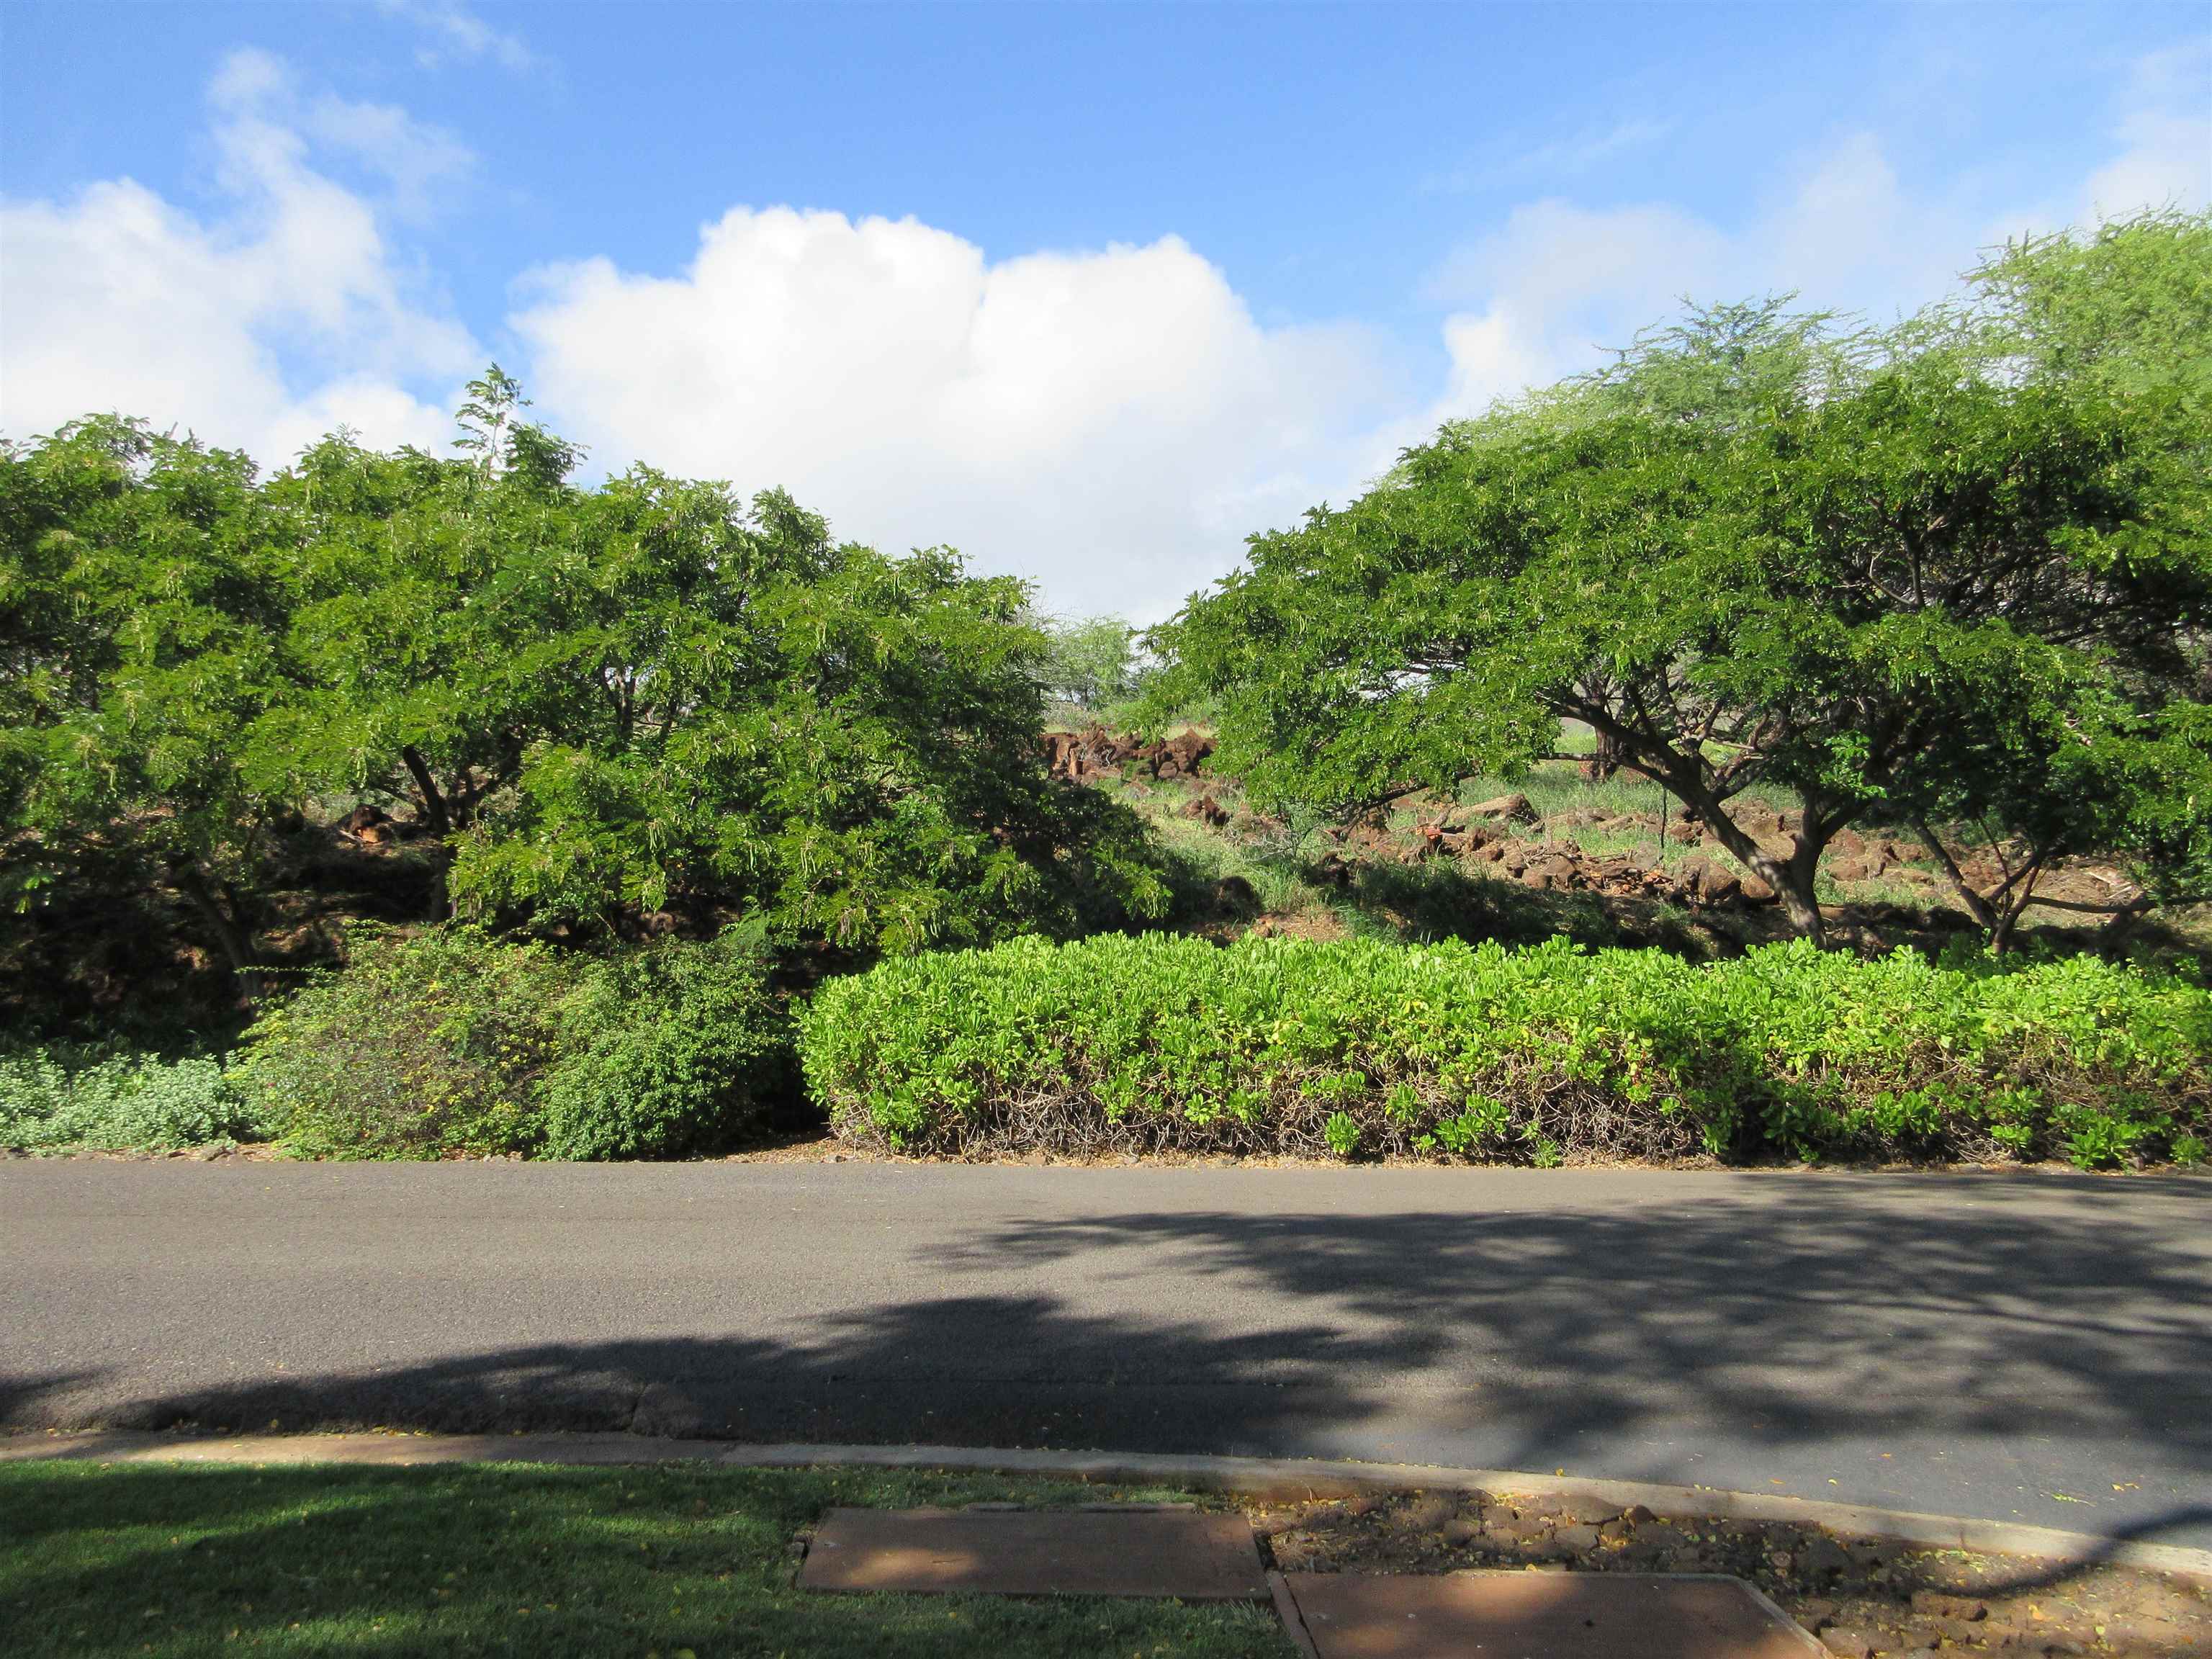 276 Hulopoe Dr  Lanai City, Hi vacant land for sale - photo 6 of 13